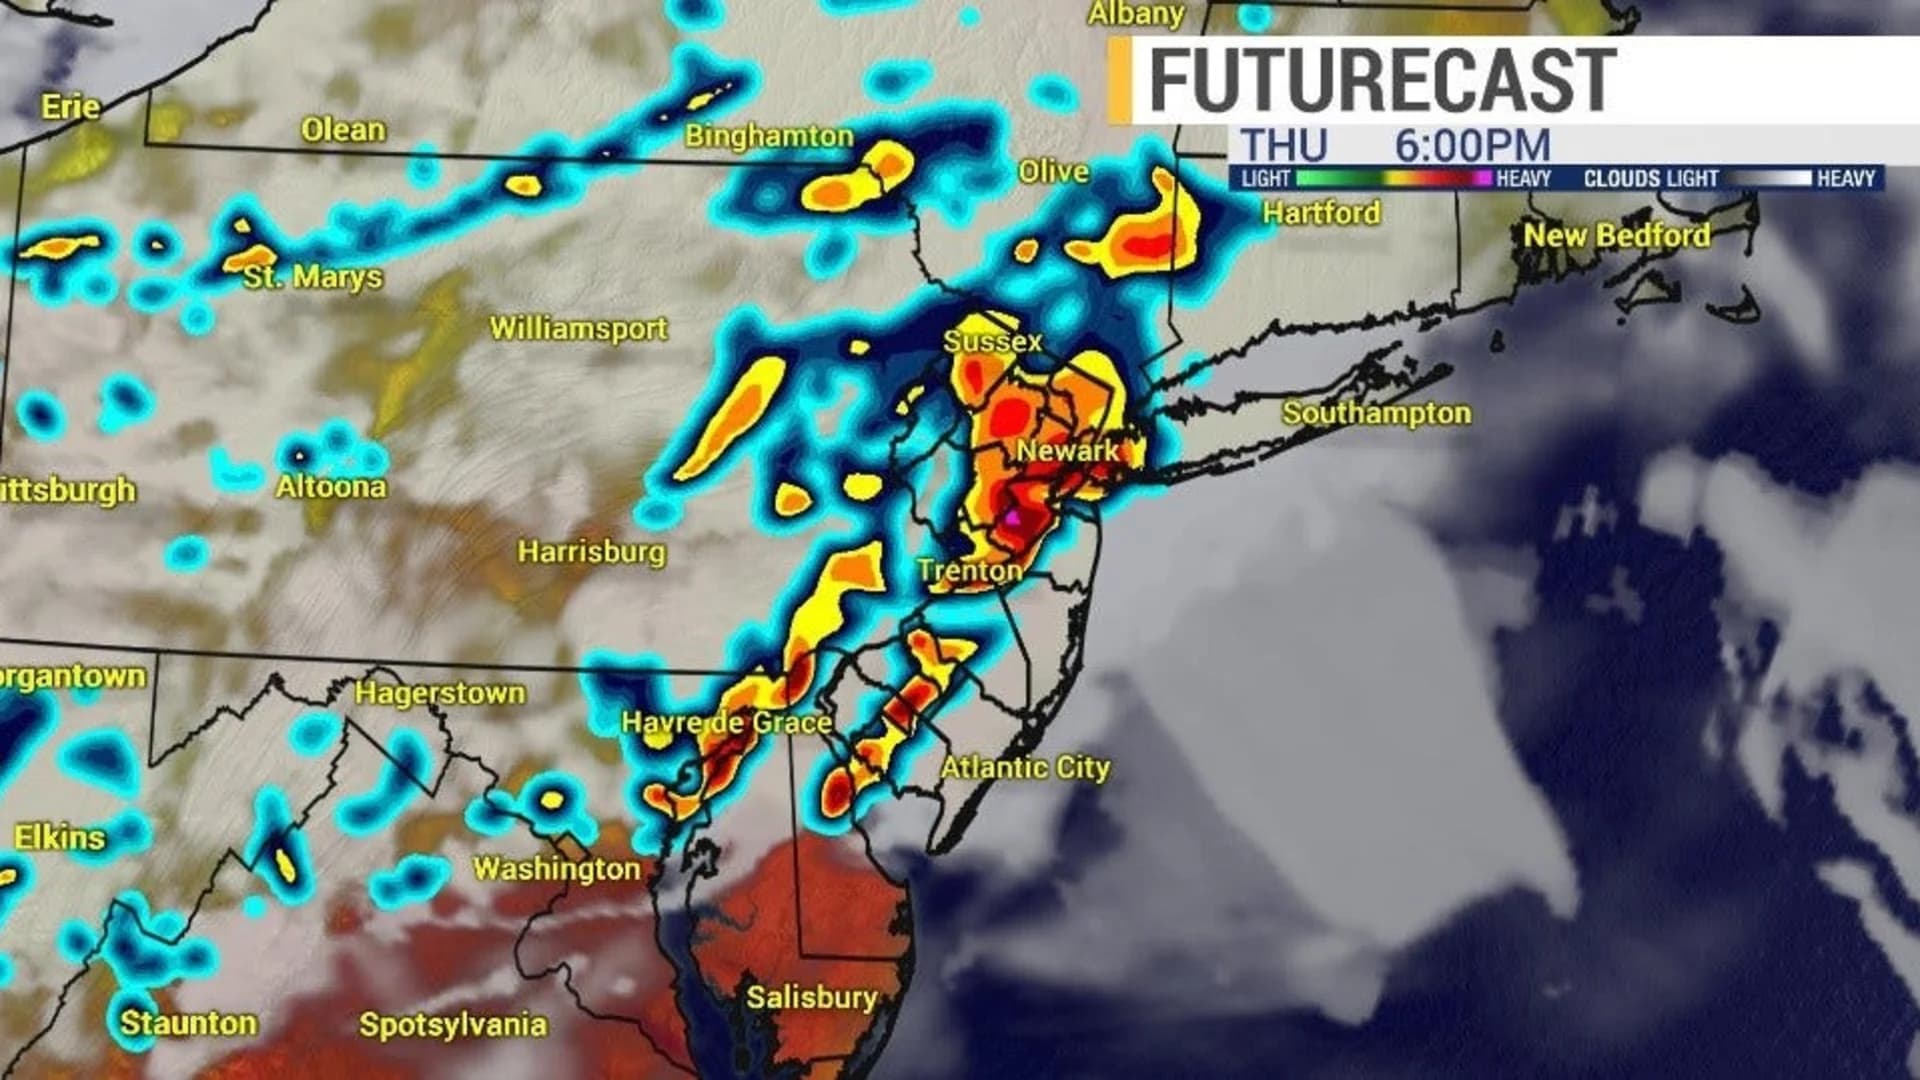 New Jersey warned of thunderstorm, flooding threats